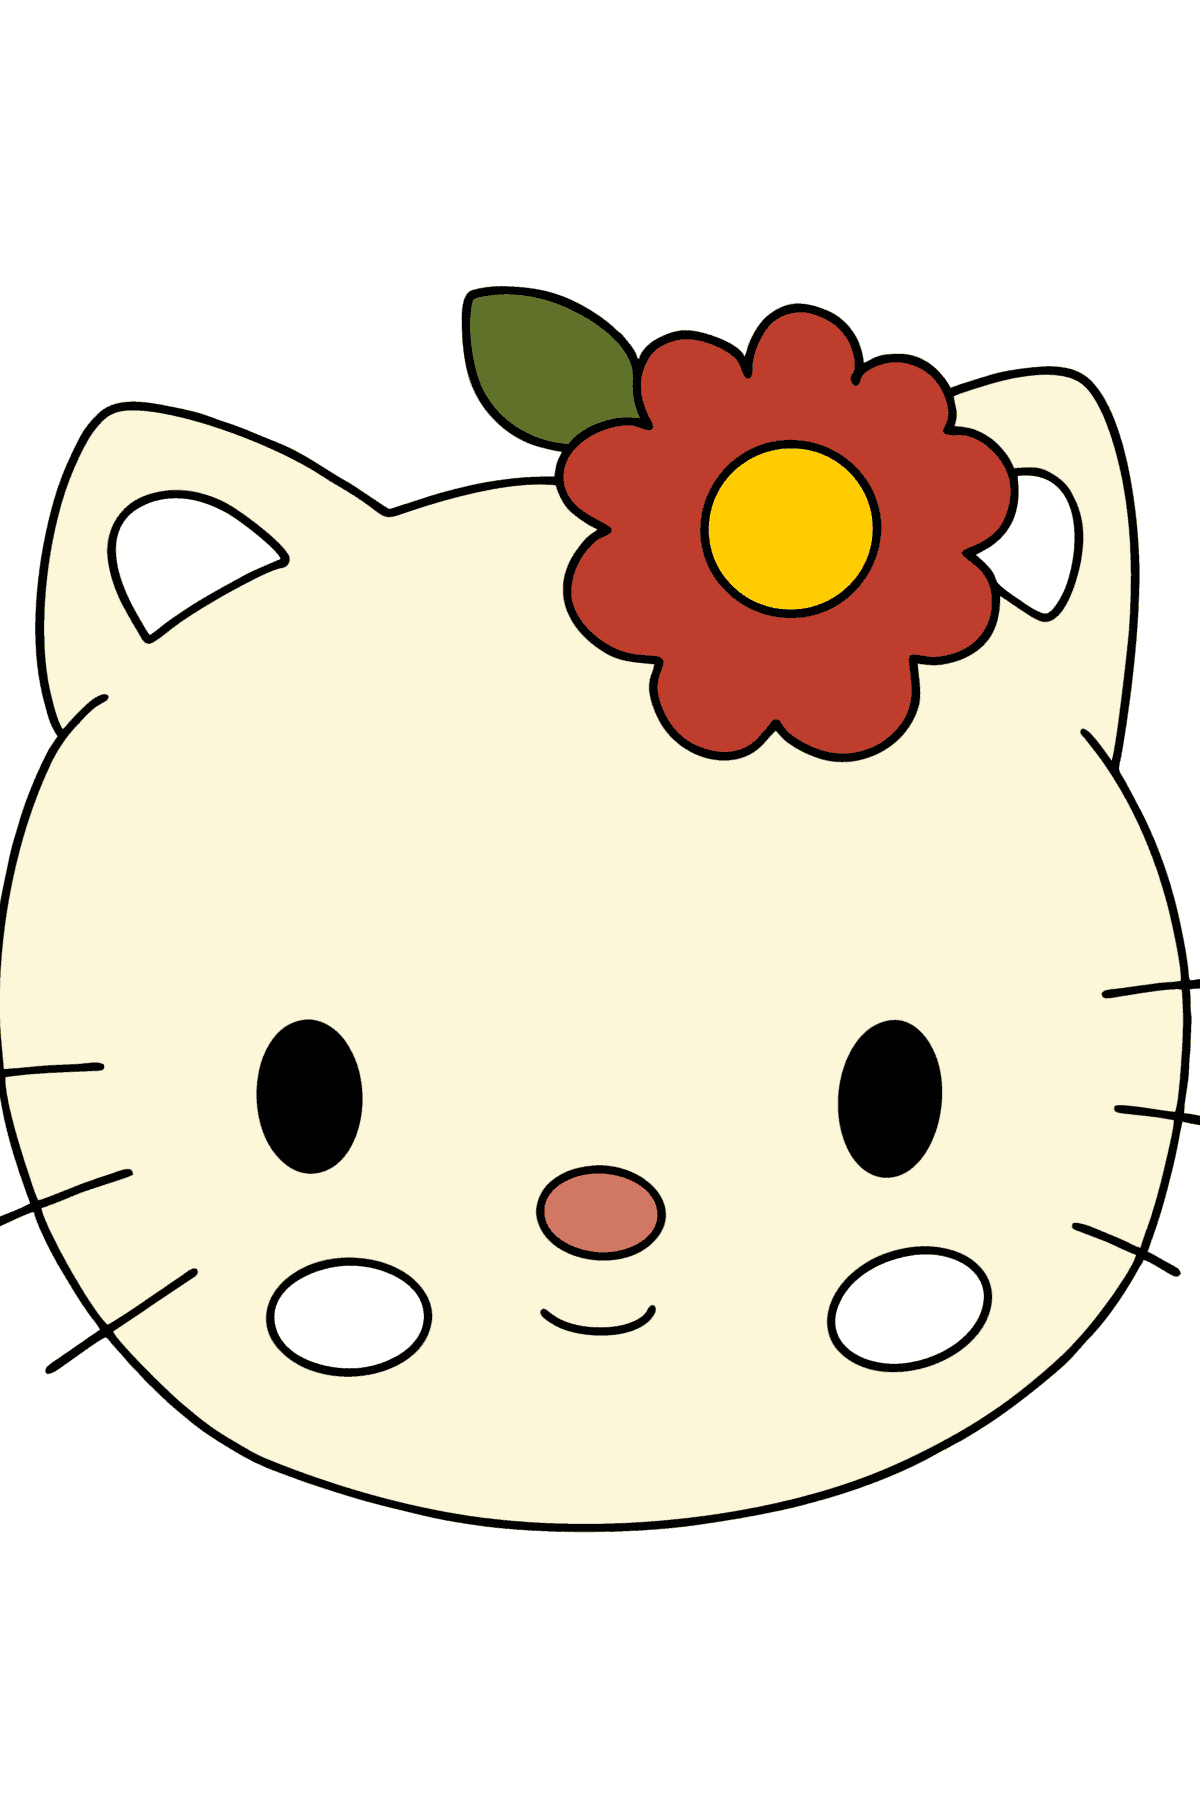 Hello Kitty muzzle coloring page - Coloring Pages for Kids